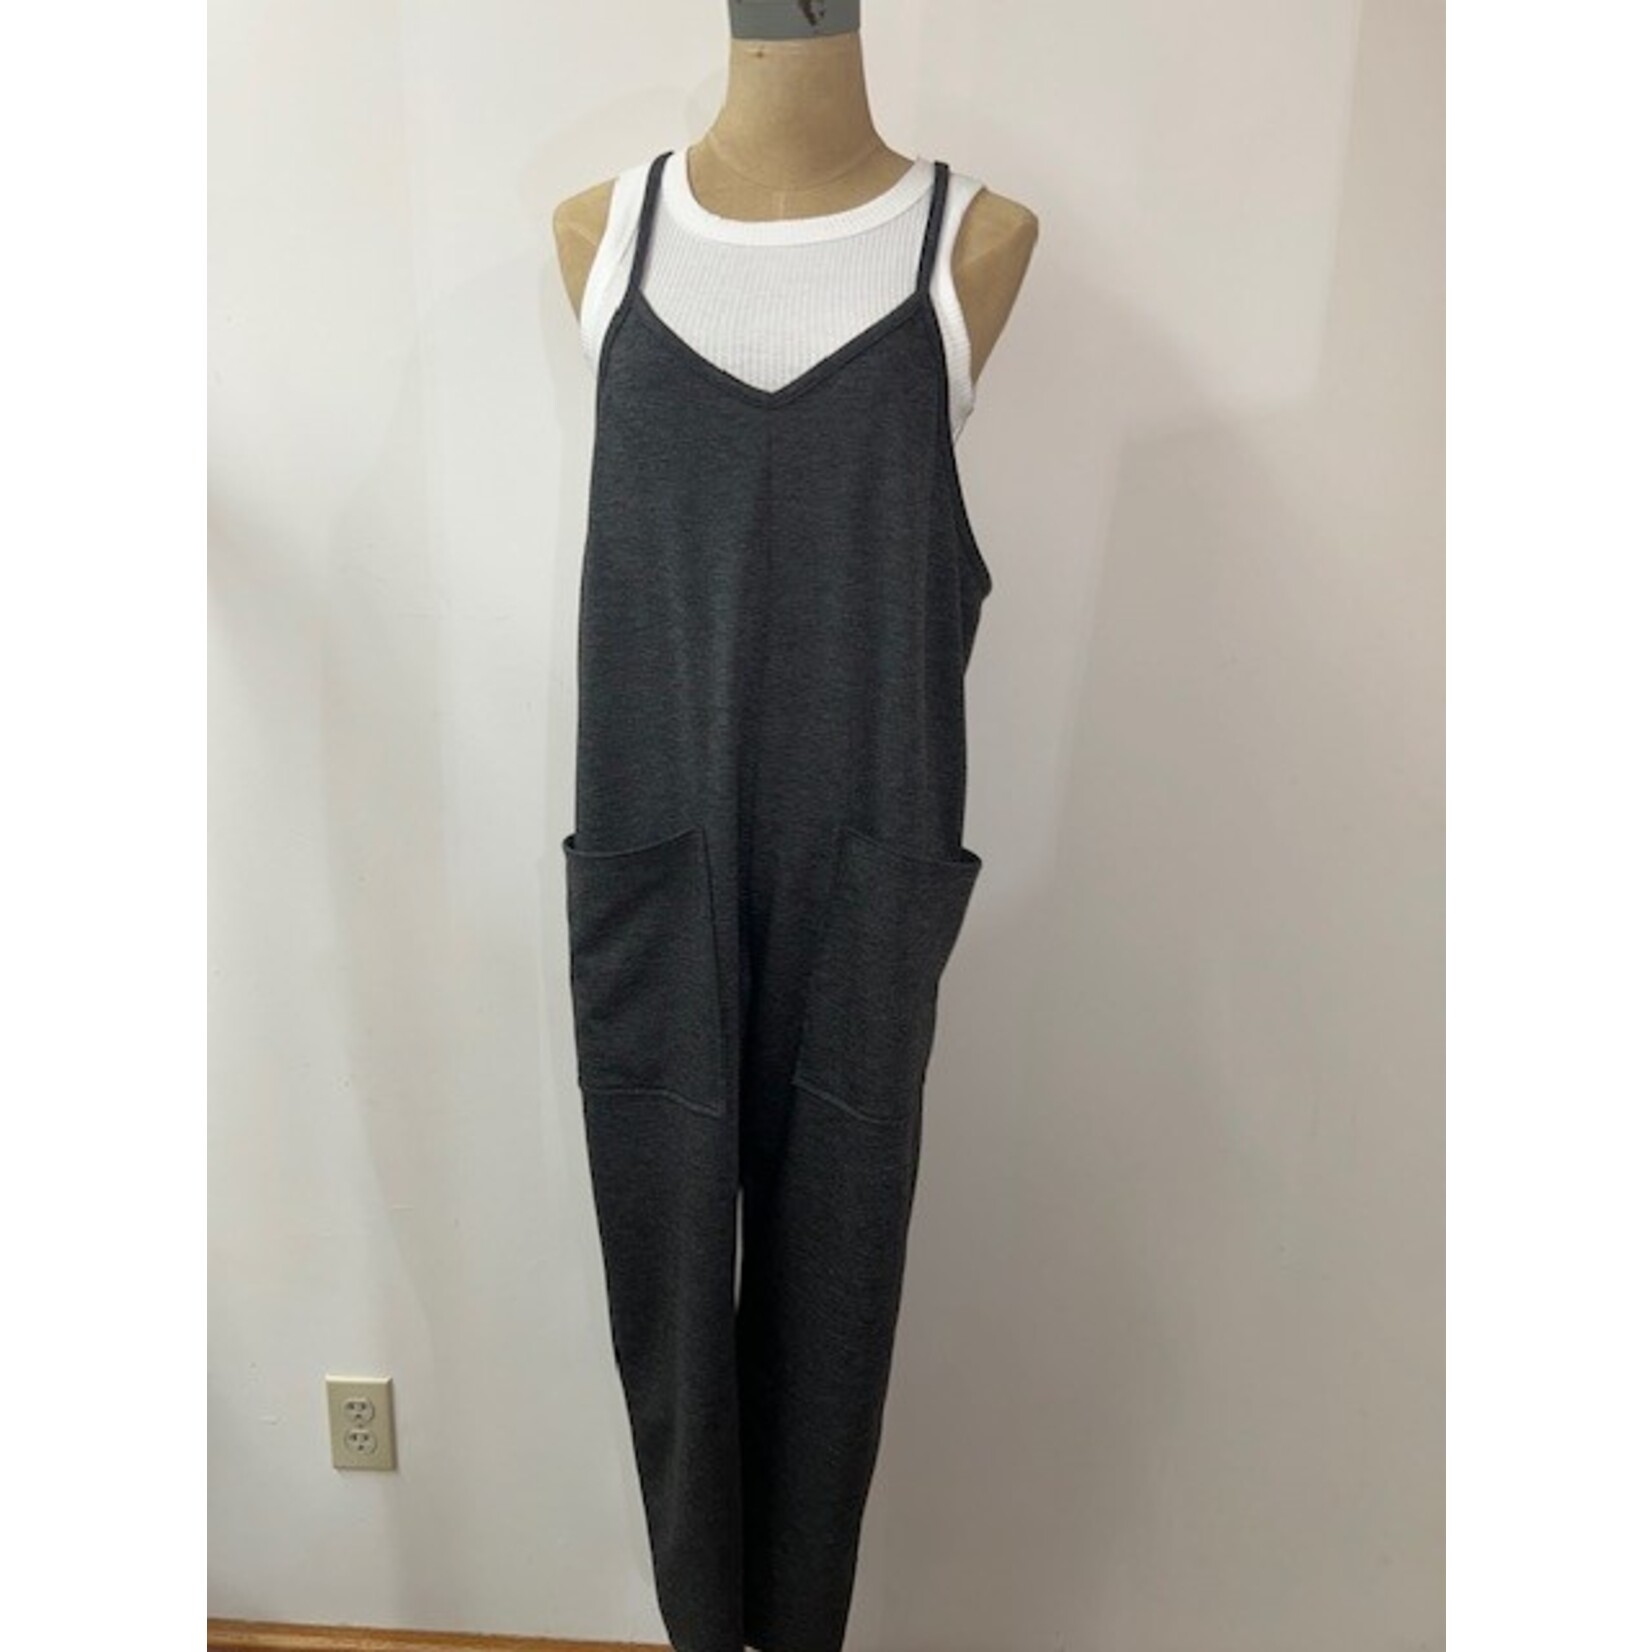 Elloh Elloh French Terry Jogger Fit Overall Jumper Charcoal